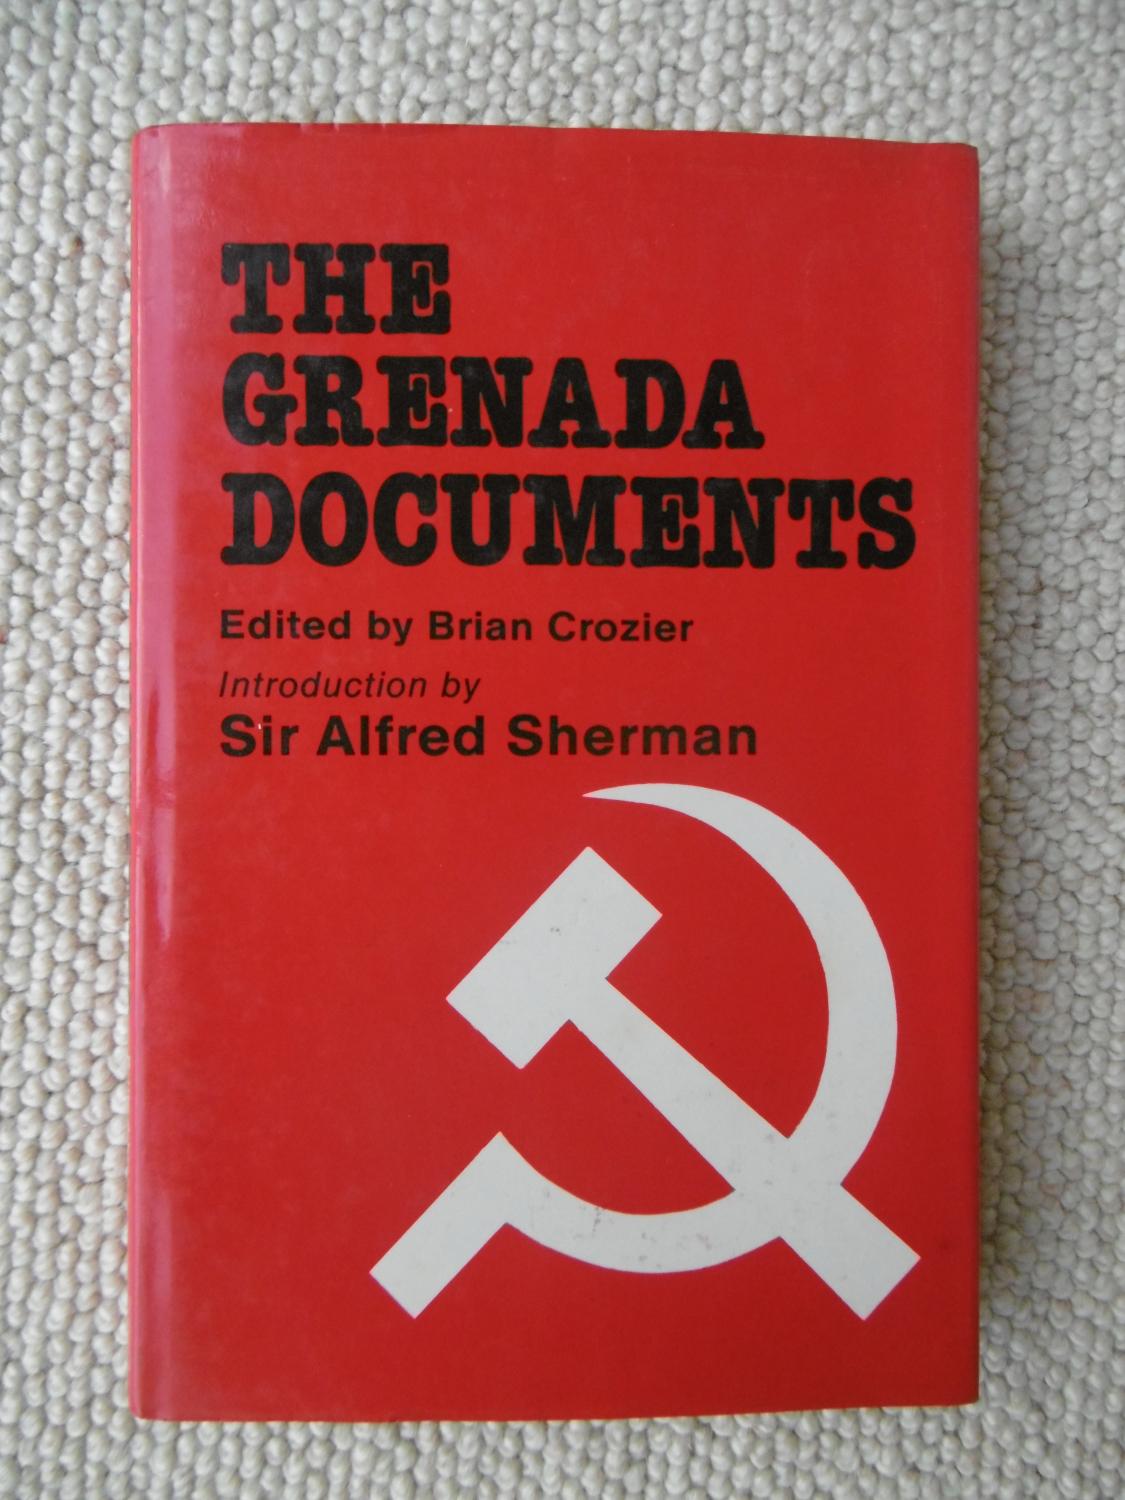 The Grenada Documents - Edited by Brian Crozier